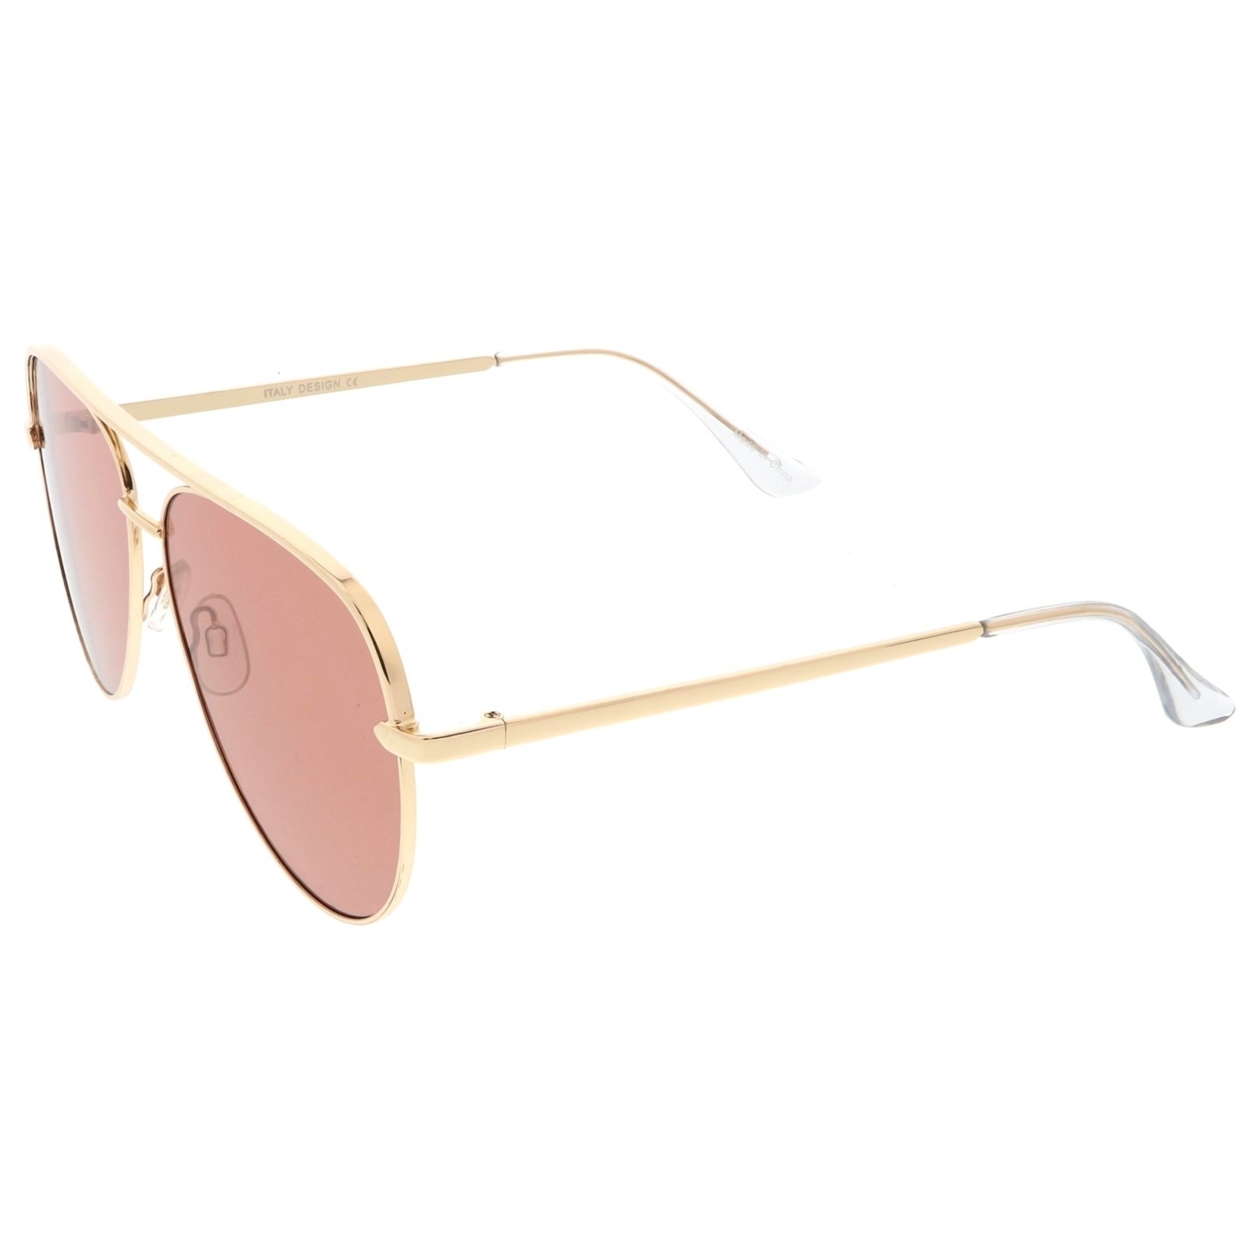 Premium Oversize Metal Aviator Sunglasses With Colored Flat Lens And Crossbar 60mm - Gold / Rose